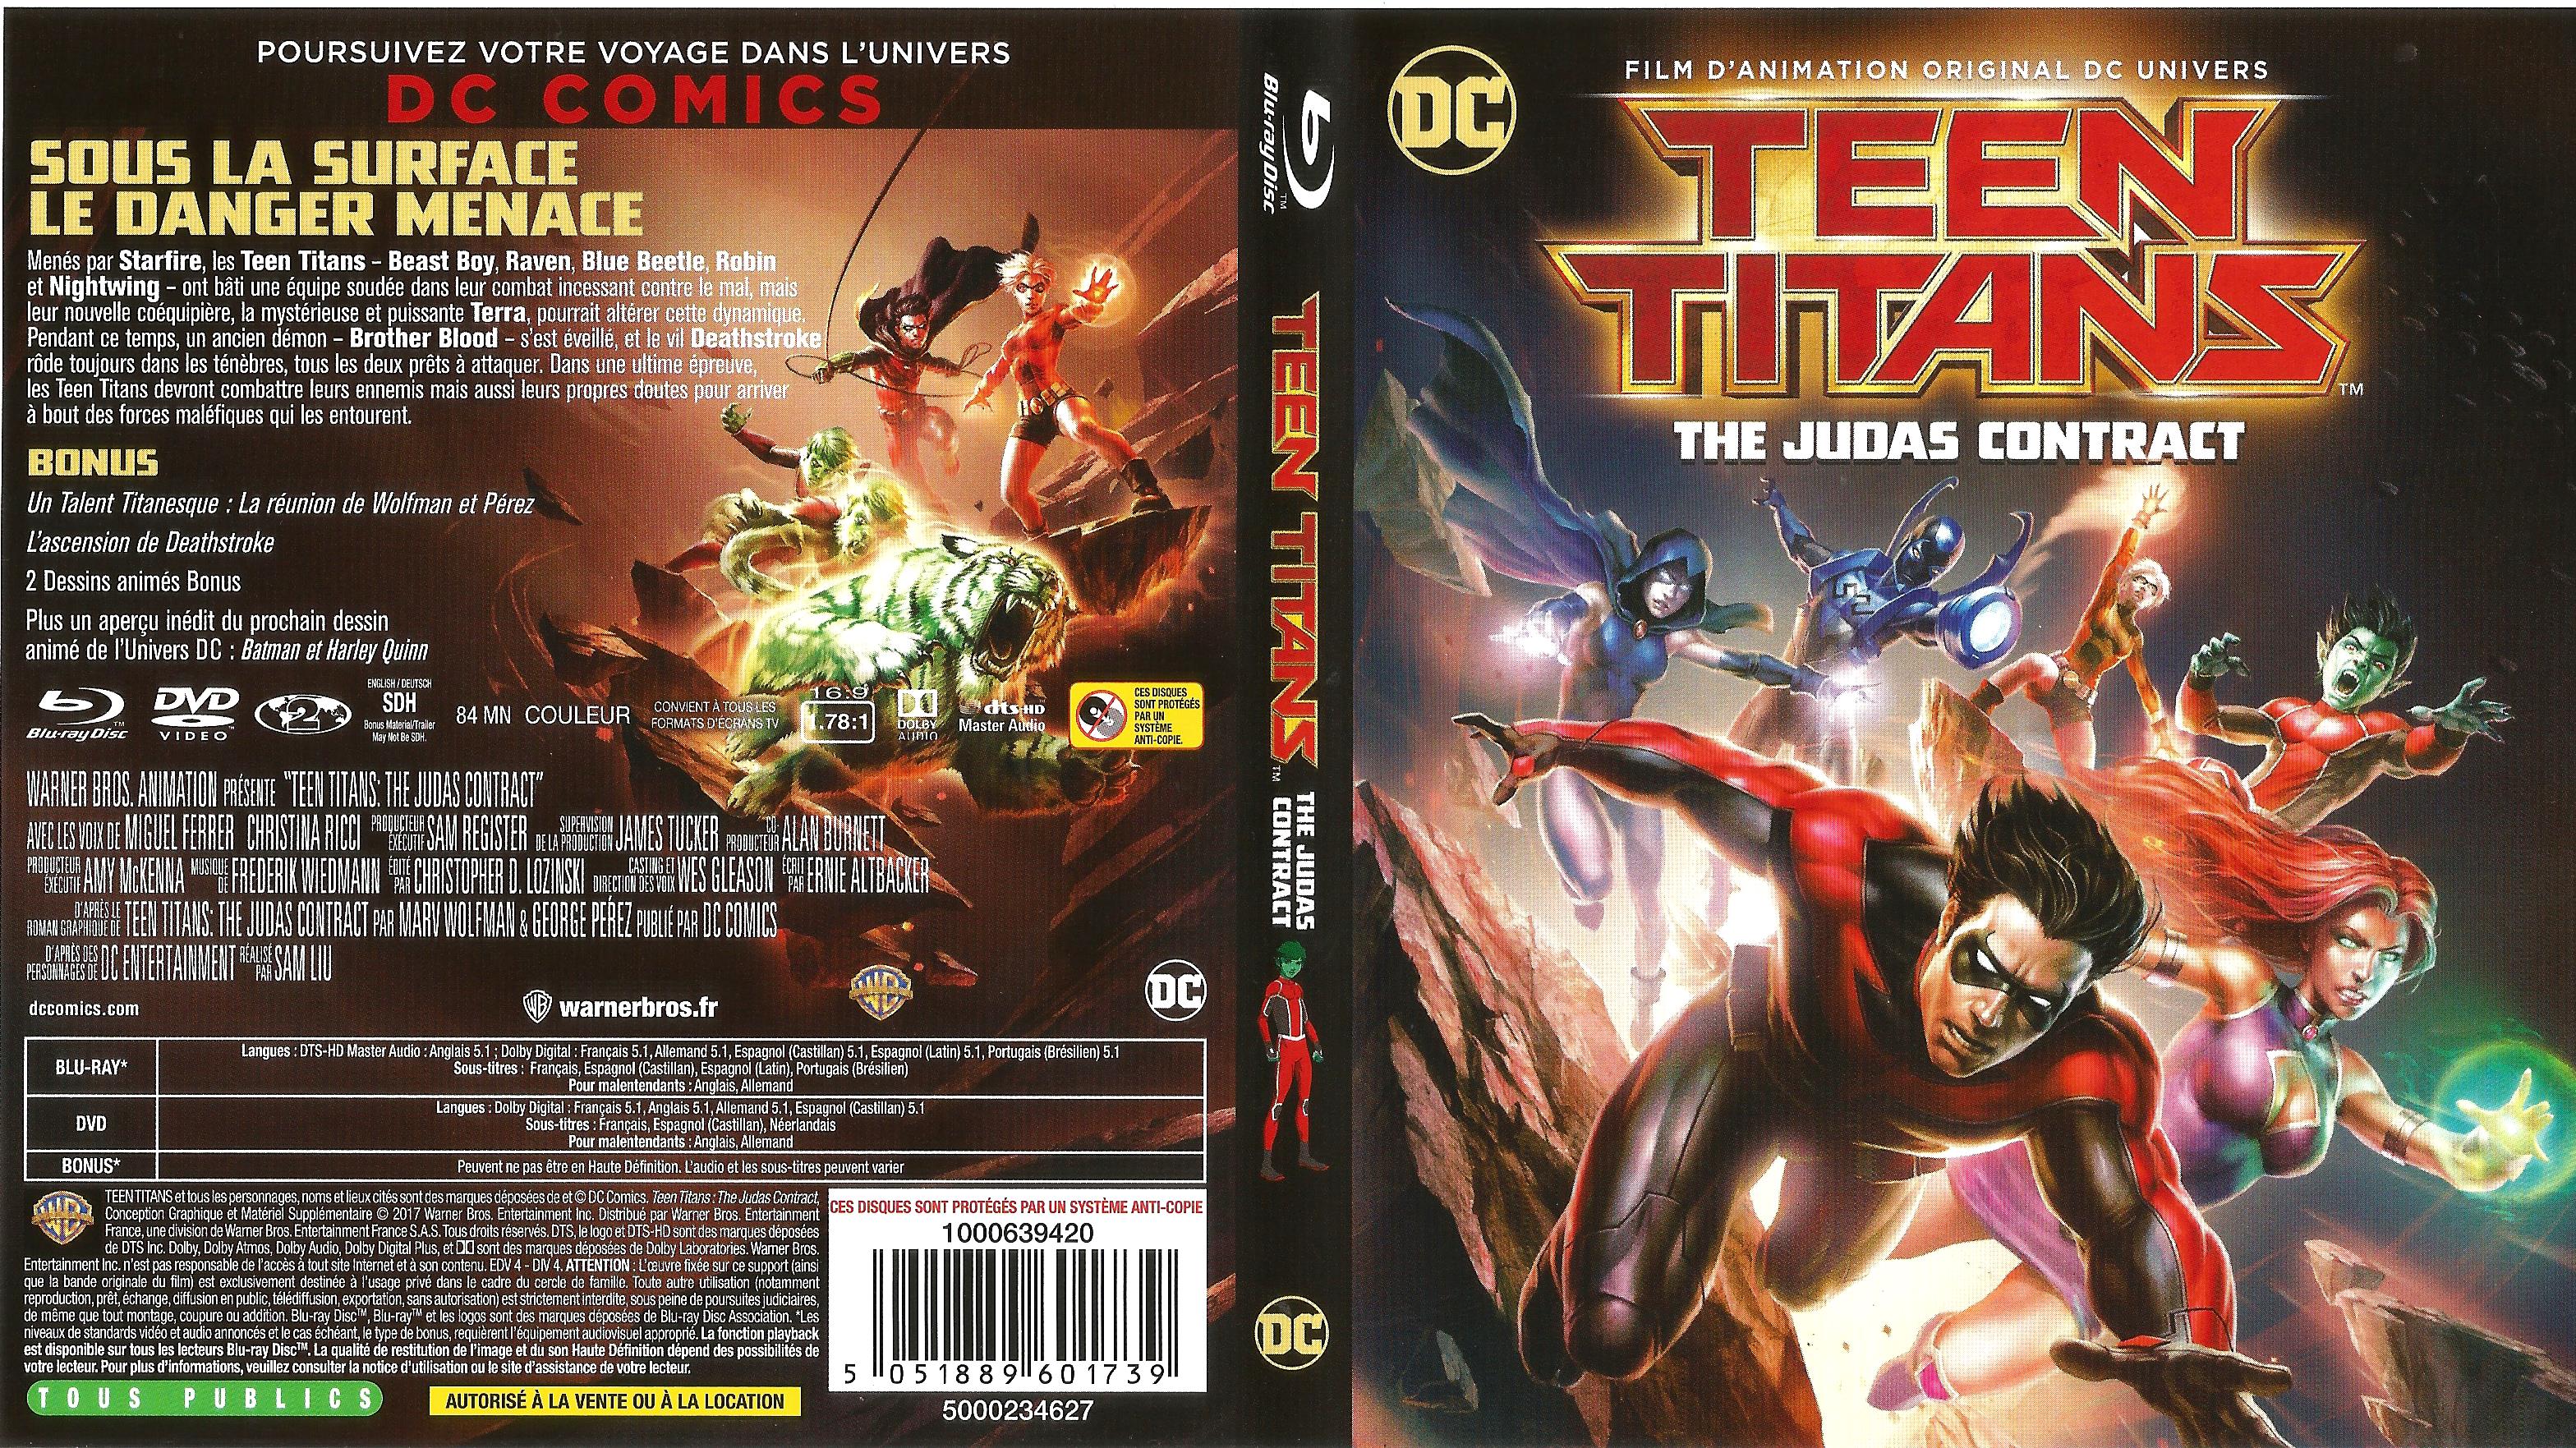 Jaquette DVD Teen Titans the Judas contract (BLU-RAY)